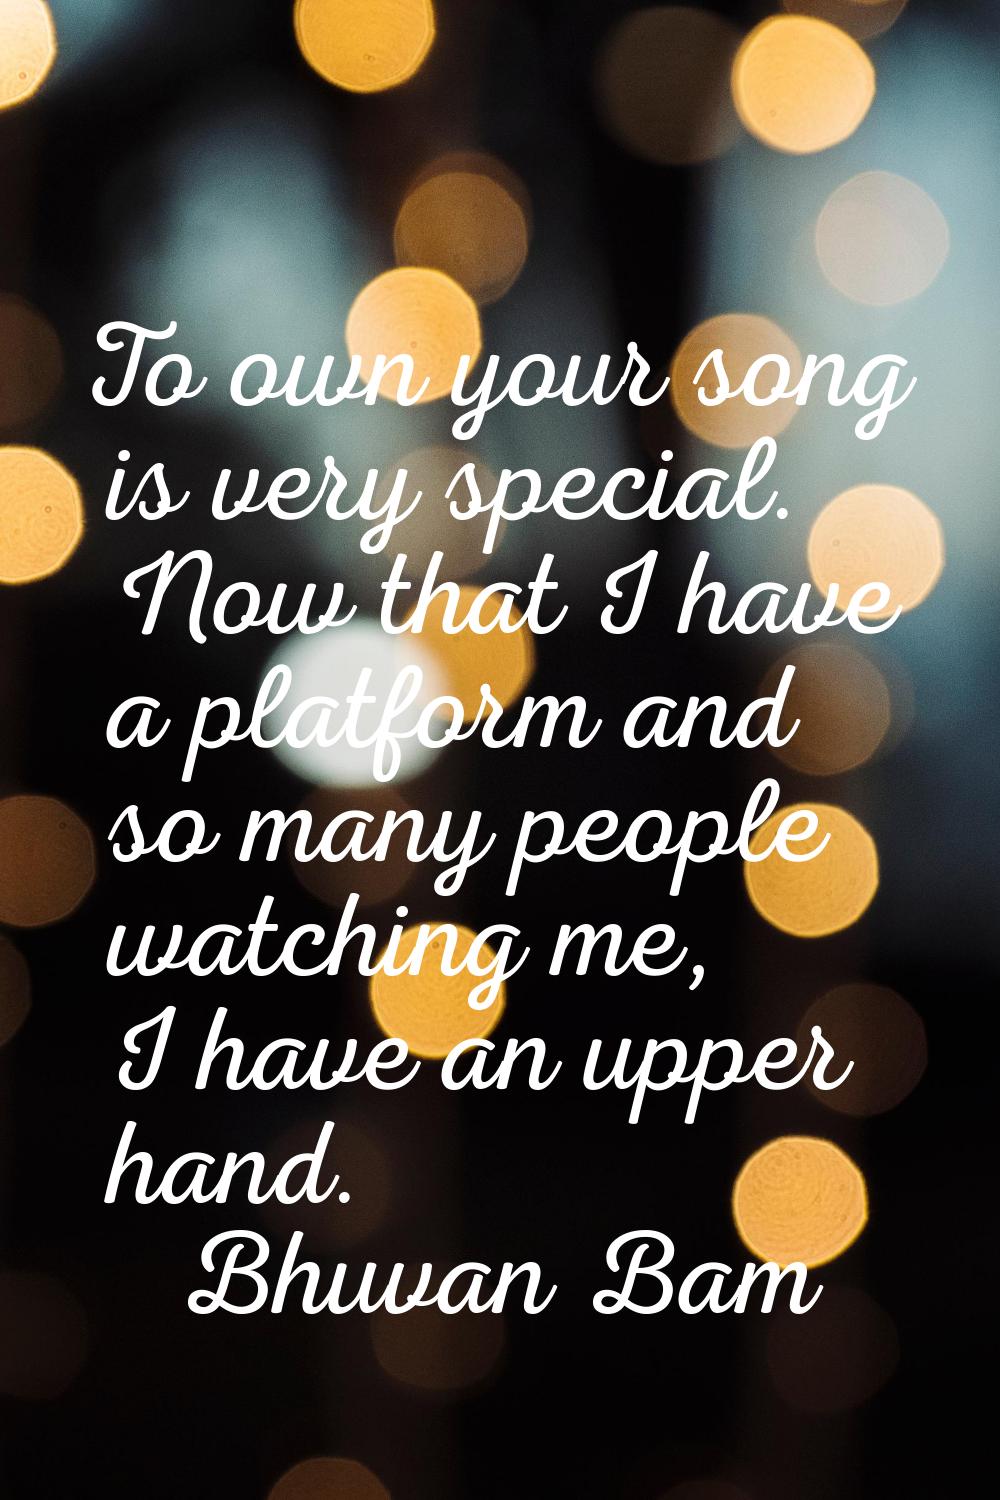 To own your song is very special. Now that I have a platform and so many people watching me, I have